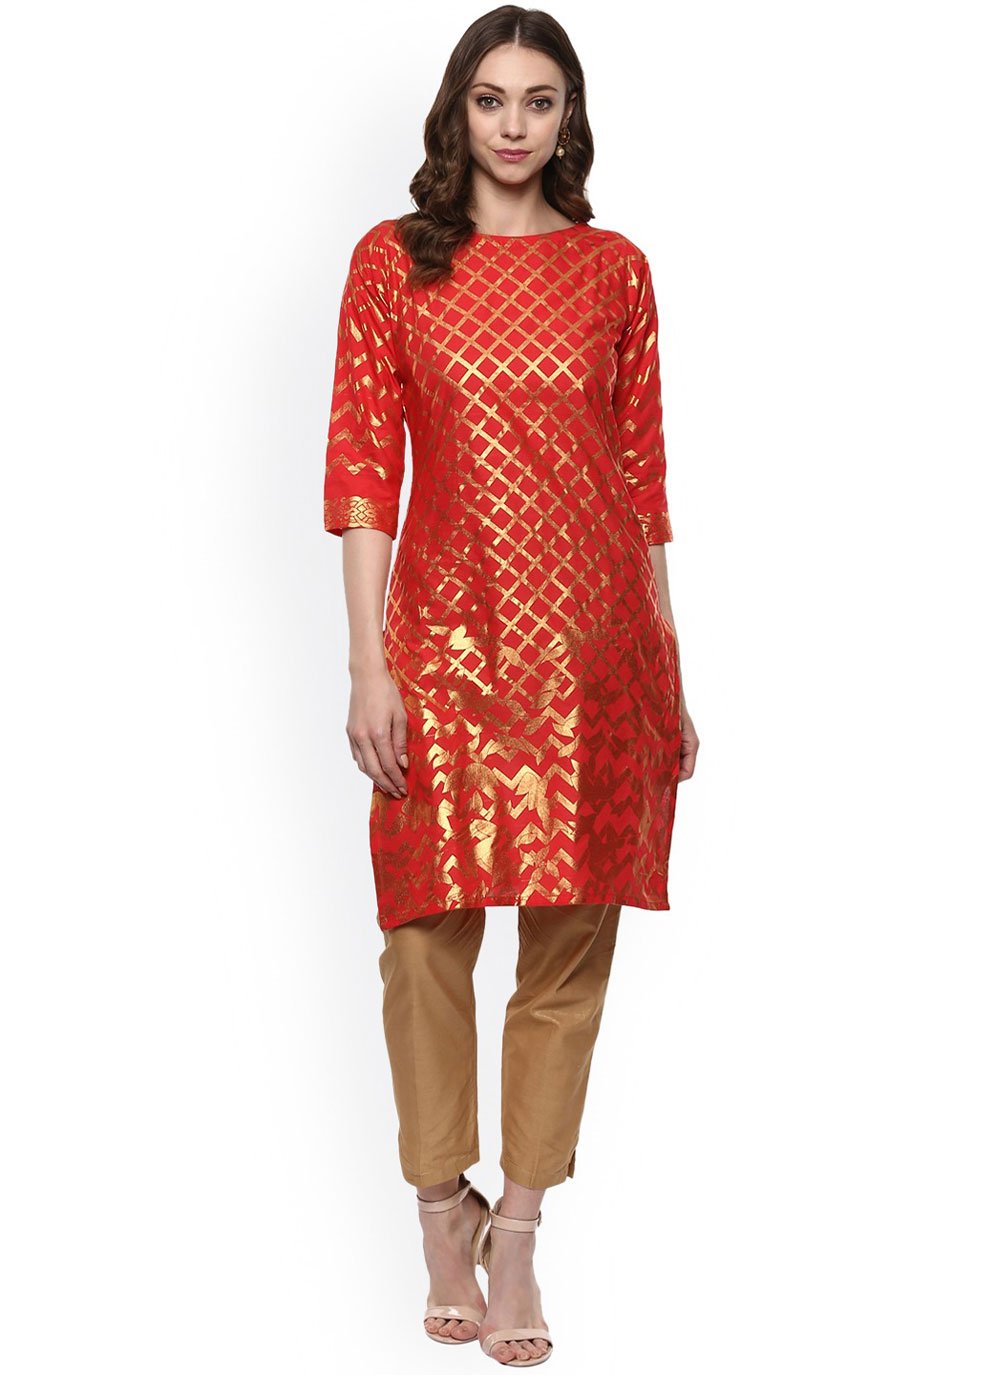 Threads by Nirmala - Benaras brocade kurti with detailing on neck $35 XL  Chest 42 inches | Facebook